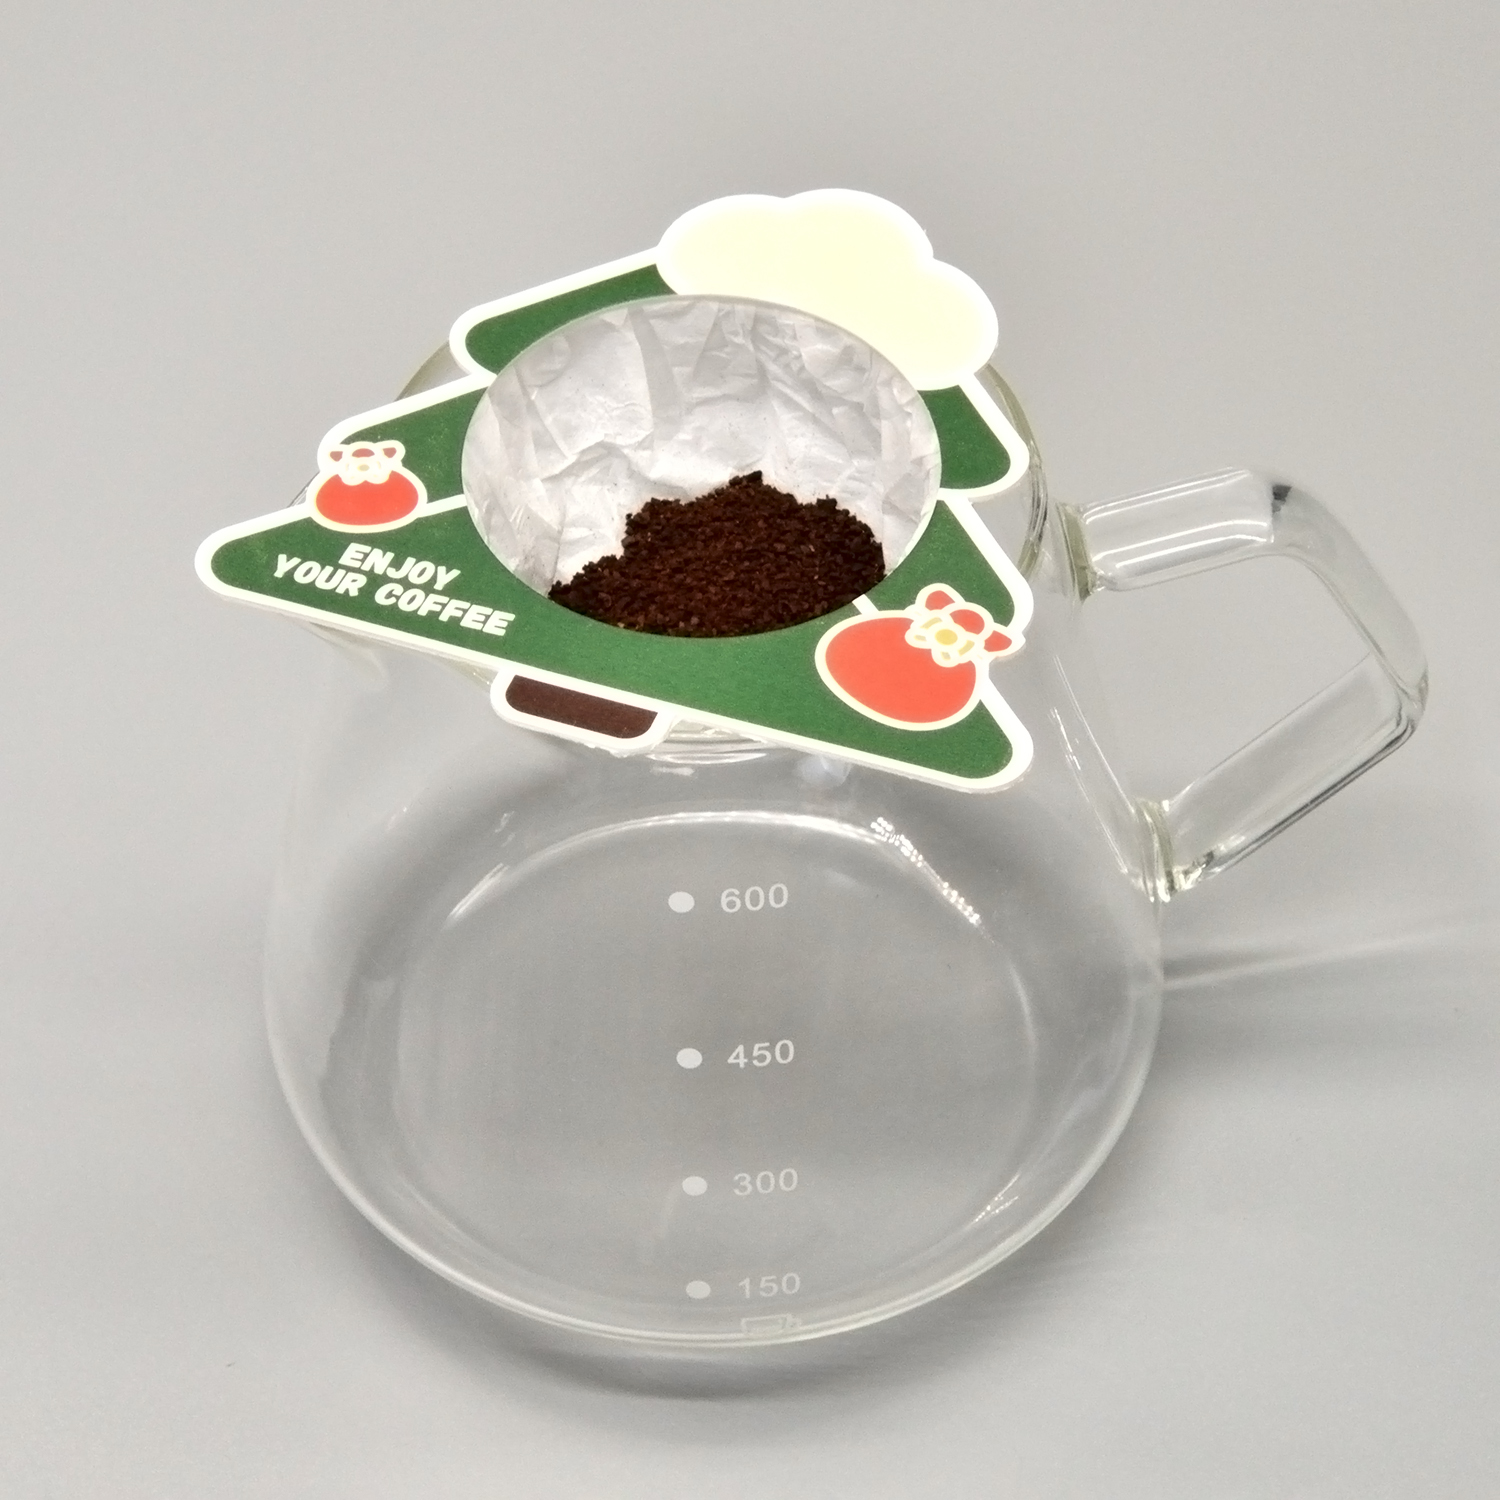 Is It Better To Use a Coffee Filter or Not?